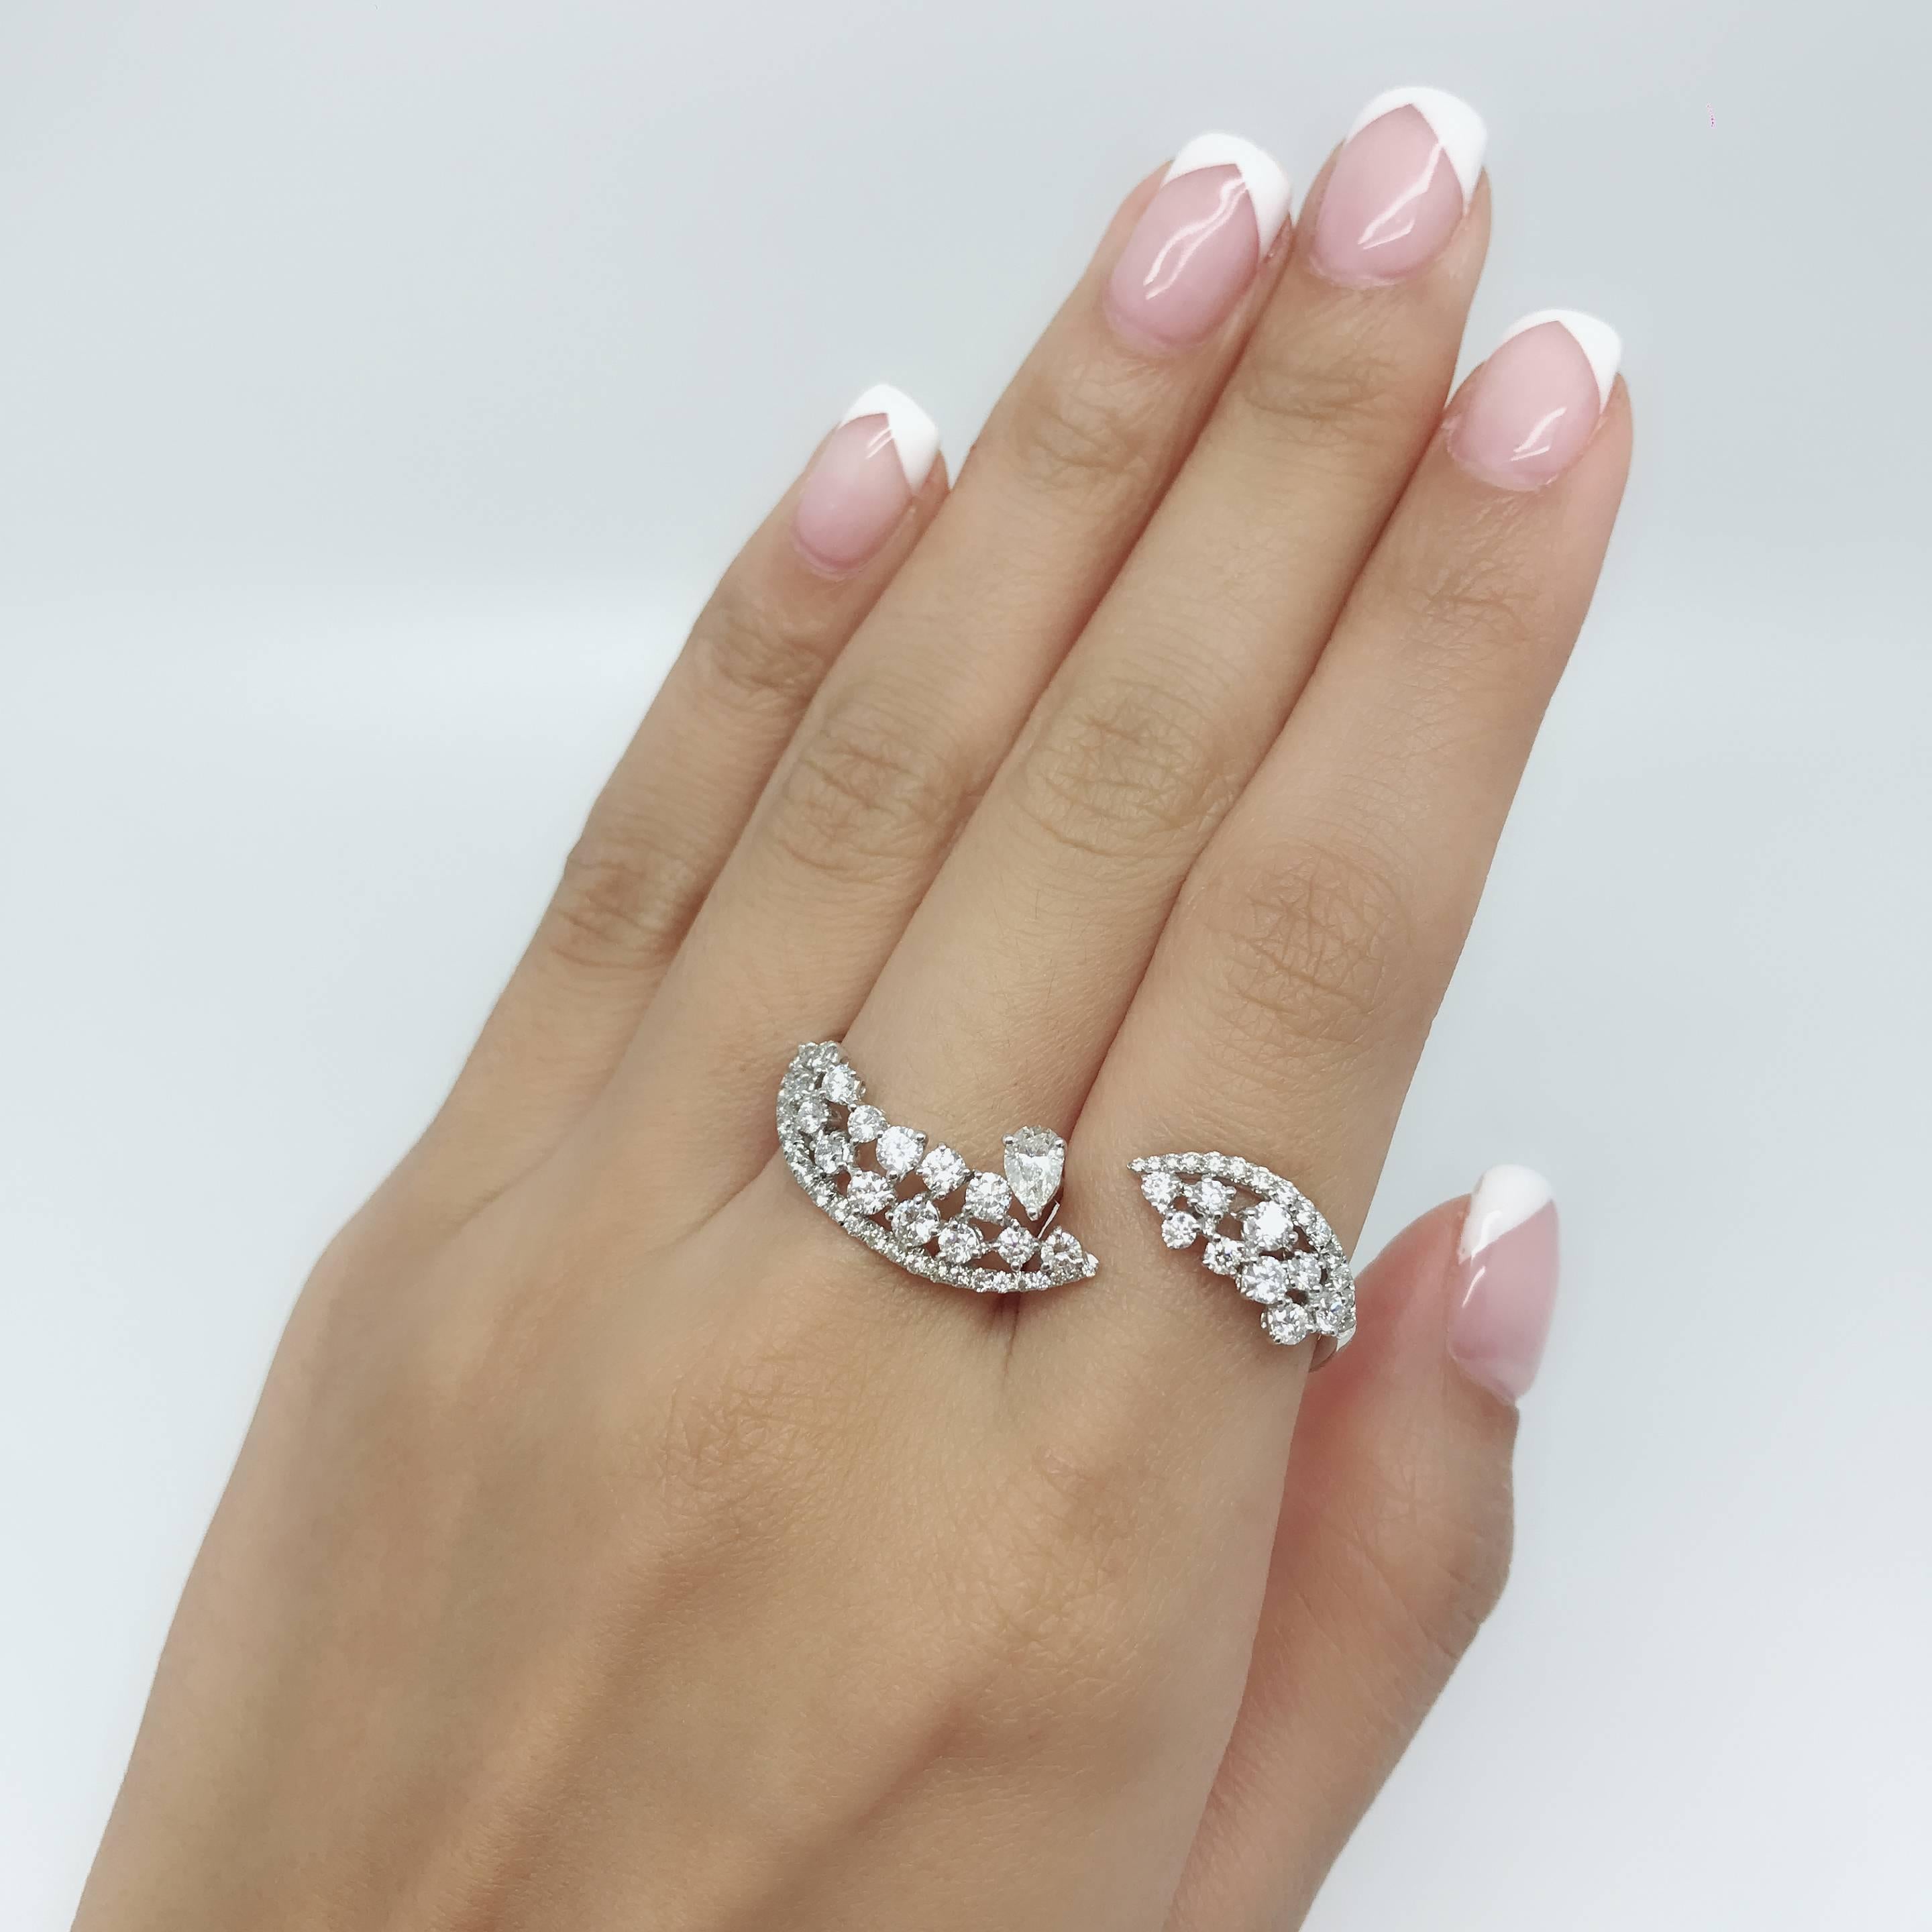 This gorgeous 2-finger diamond ring, handcrafted by GILIN, featuring a 0.30 carat Marquise cut diamond in the centre and 1.90 carat round brilliant diamonds along side. Ring is set in 18 Karat white gold.
